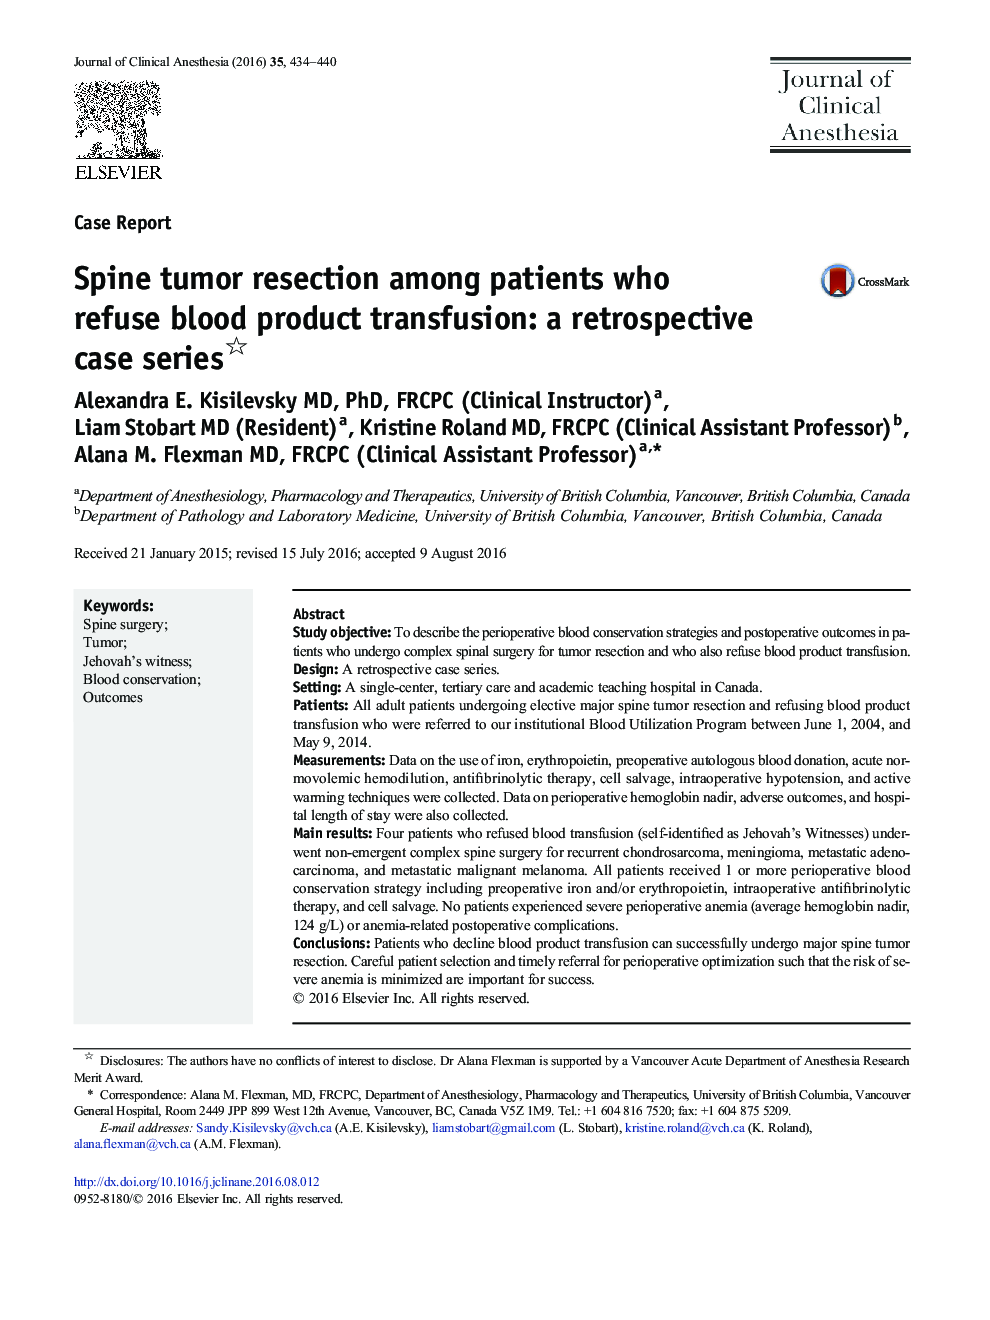 Spine tumor resection among patients who refuse blood product transfusion: a retrospective case series